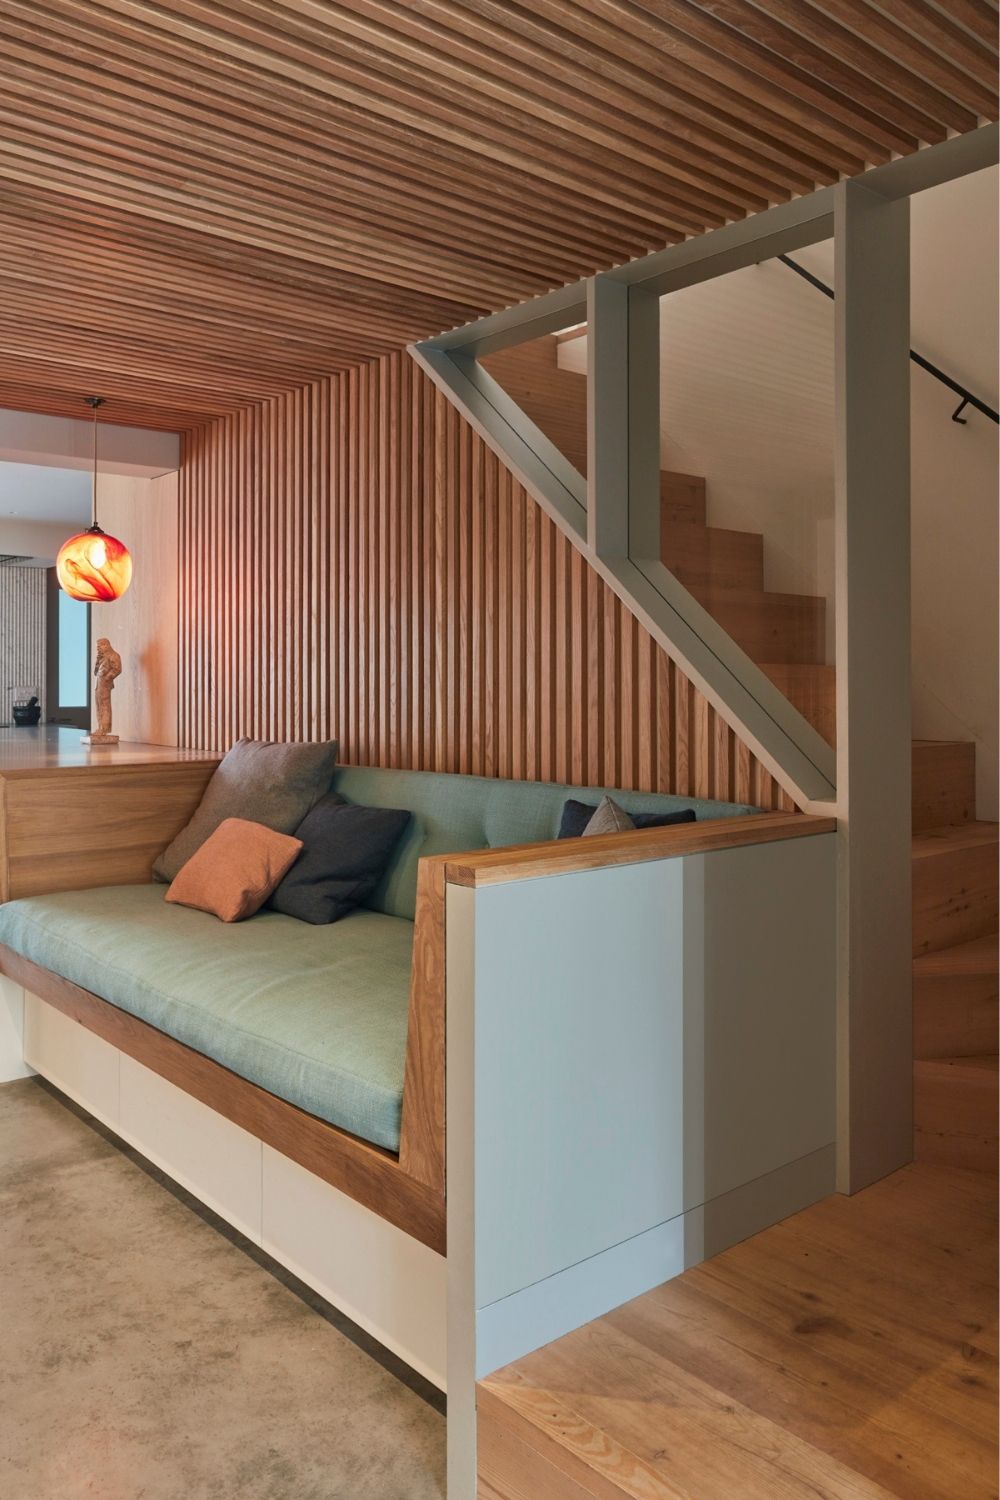 evoke projects ltd islington bespoke timber built in sofa and batten clad walls and ceiling